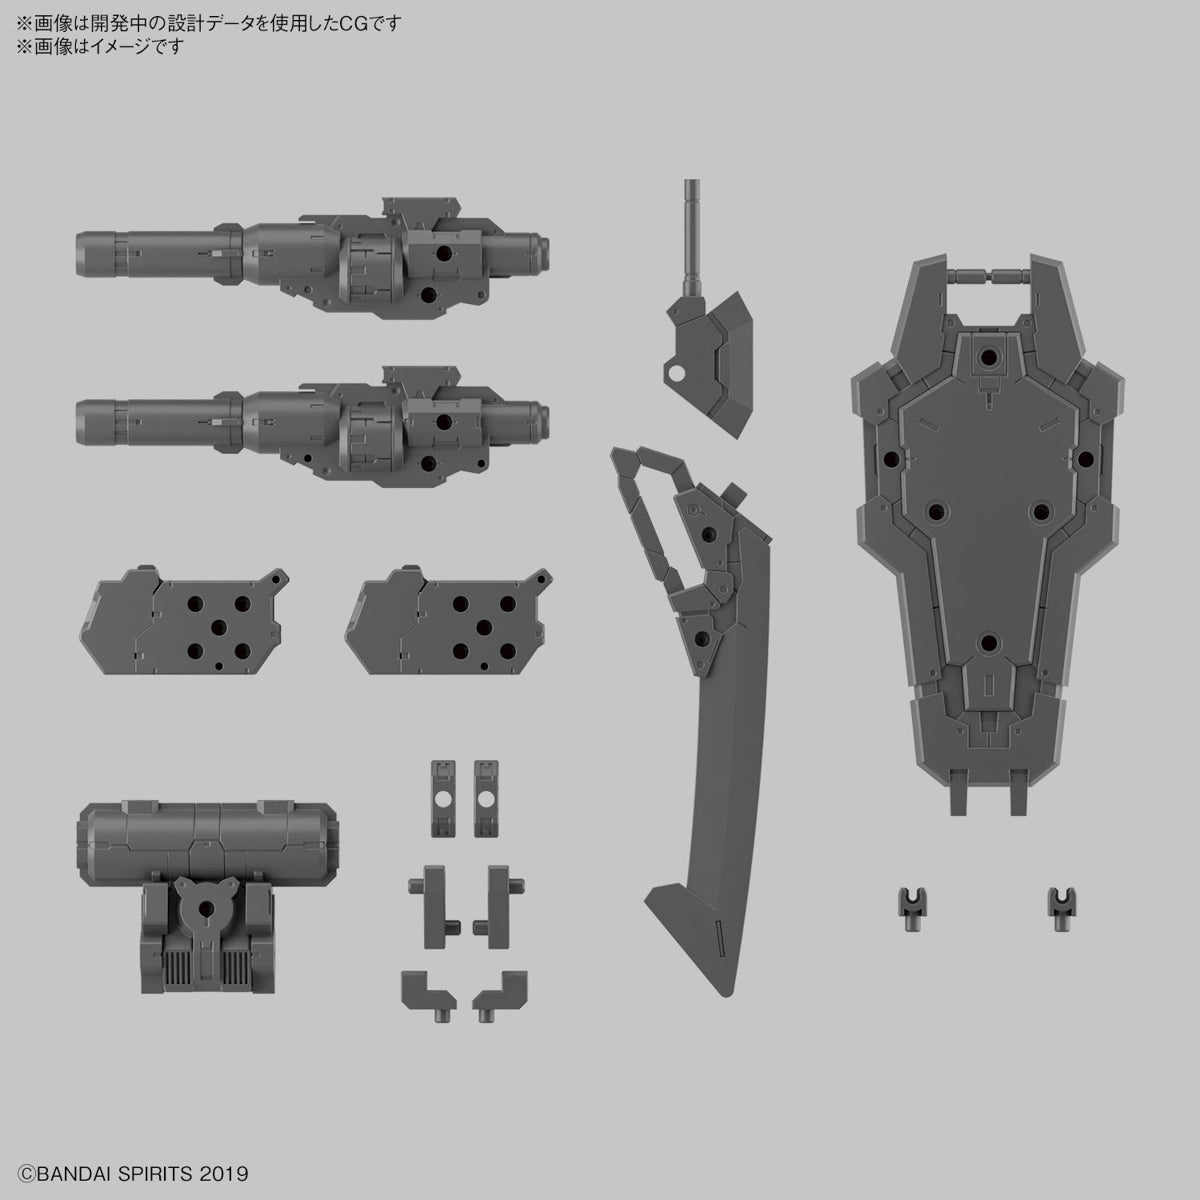 30mm customize weapons heavy weapon 1Bandai® Plastic Model Kit 30 Minutes Missions Plamo Series 30MM CUSTOMIZE WEAPONS HEAVY WEAPON 1